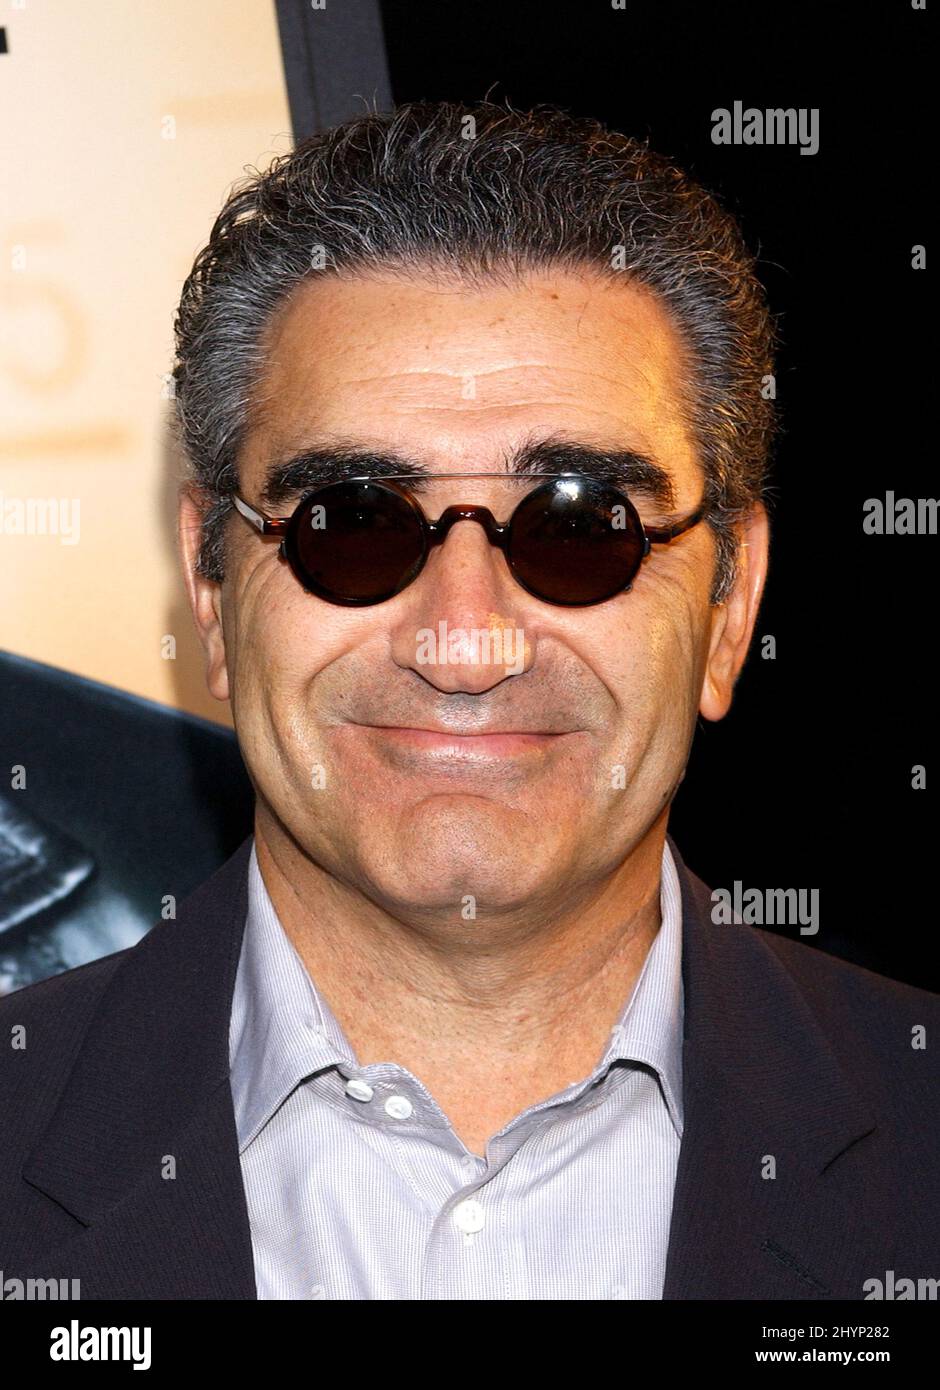 Eugene Levy attends 'The Man' Los Angeles Premiere. Picture: UK Press ...